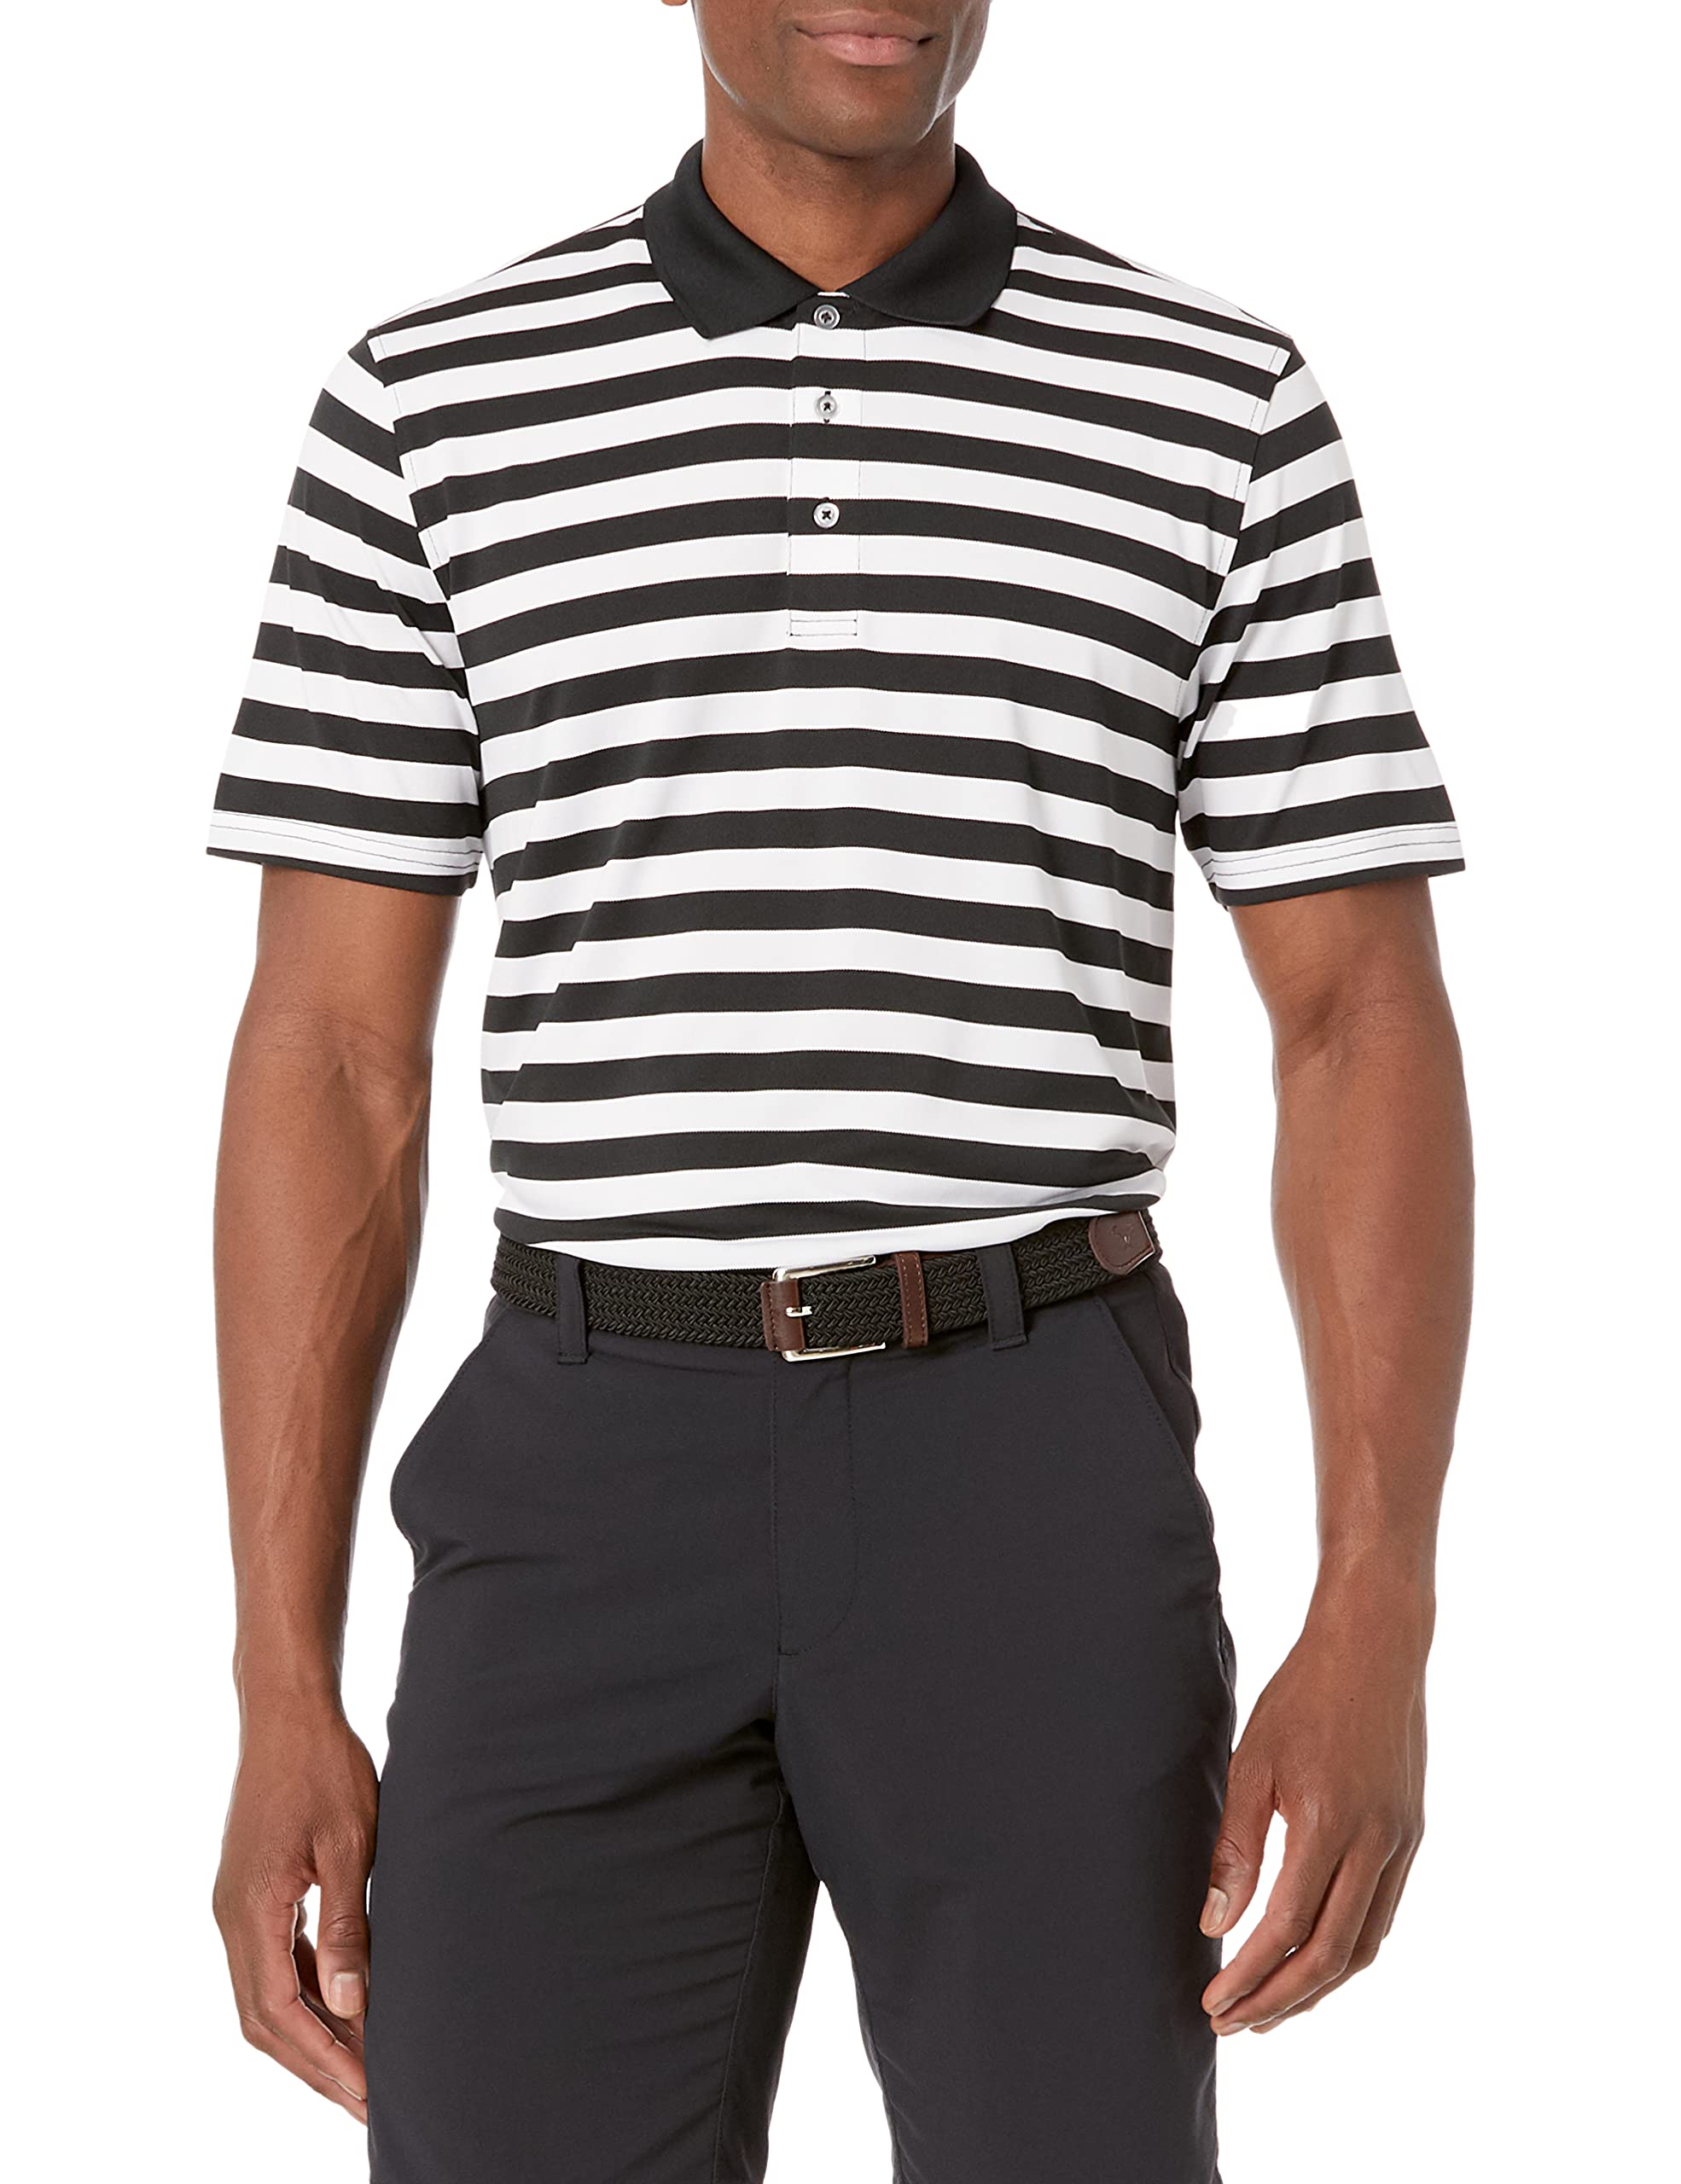 Amazon Essentials Men's Regular-Fit Quick-Dry Golf Polo Shirt (Various Colors & Sizes) $5.90 + Free Shipping w/ Prime or on $35+